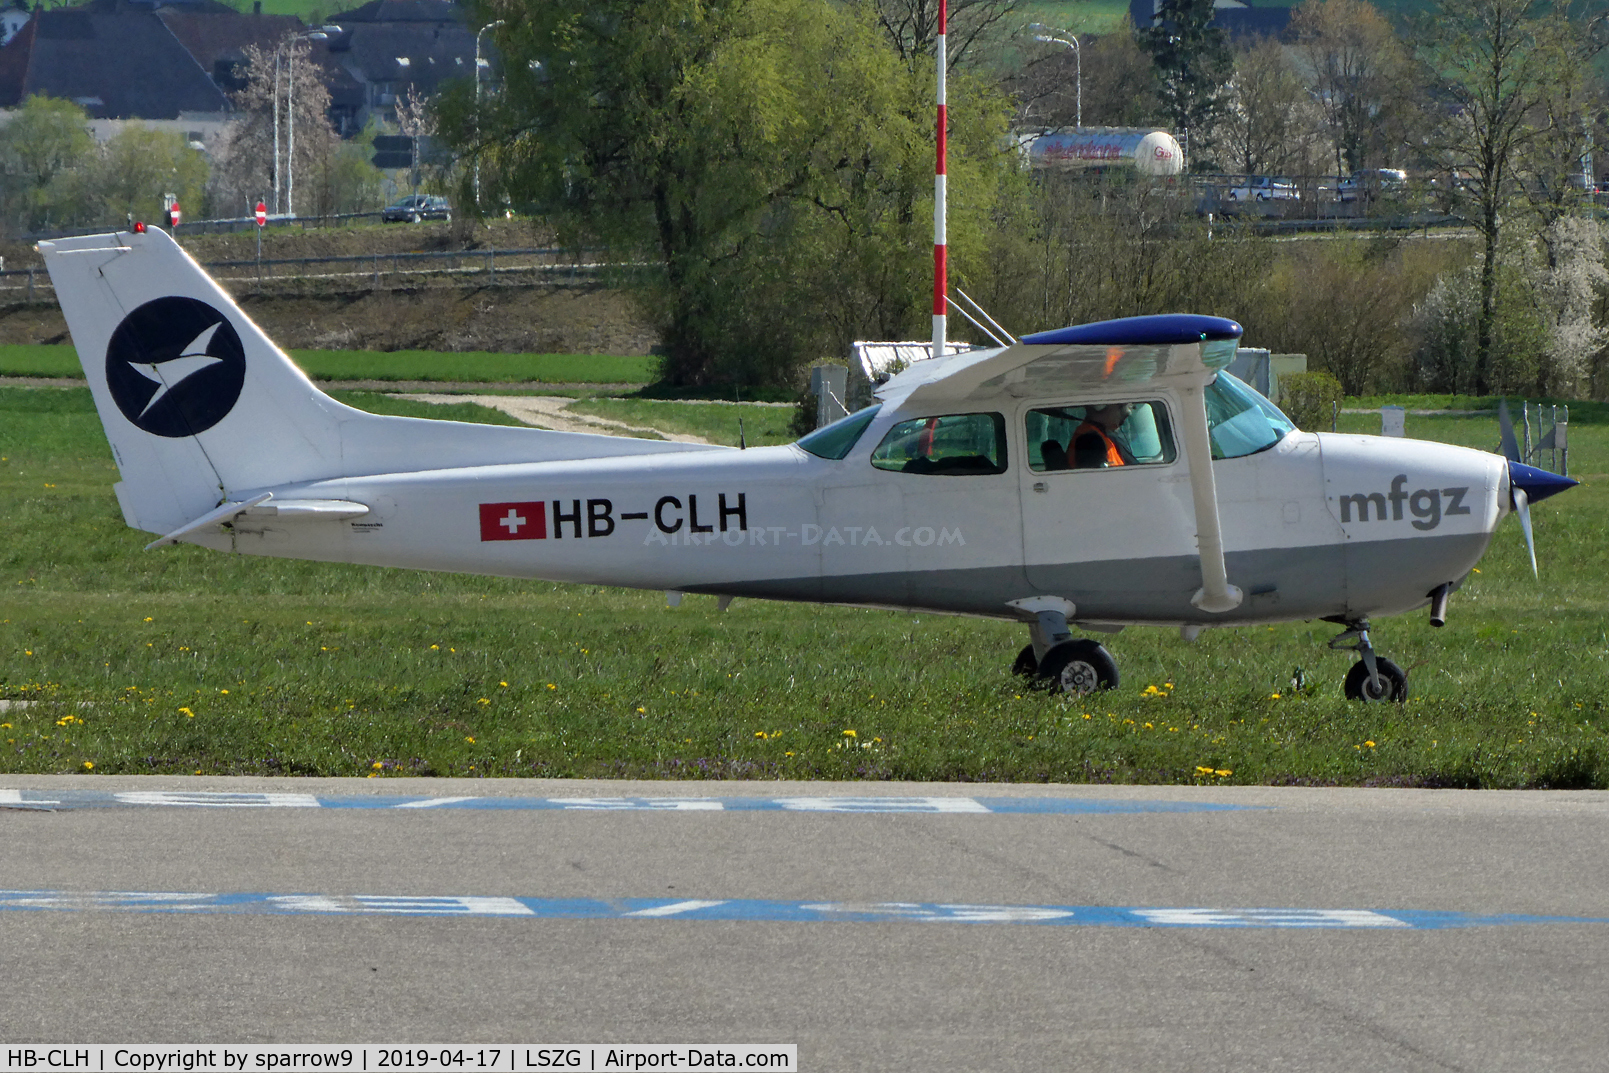 HB-CLH, 1981 Cessna 172P C/N 17274459, New paint-scheme. At Grenchen.